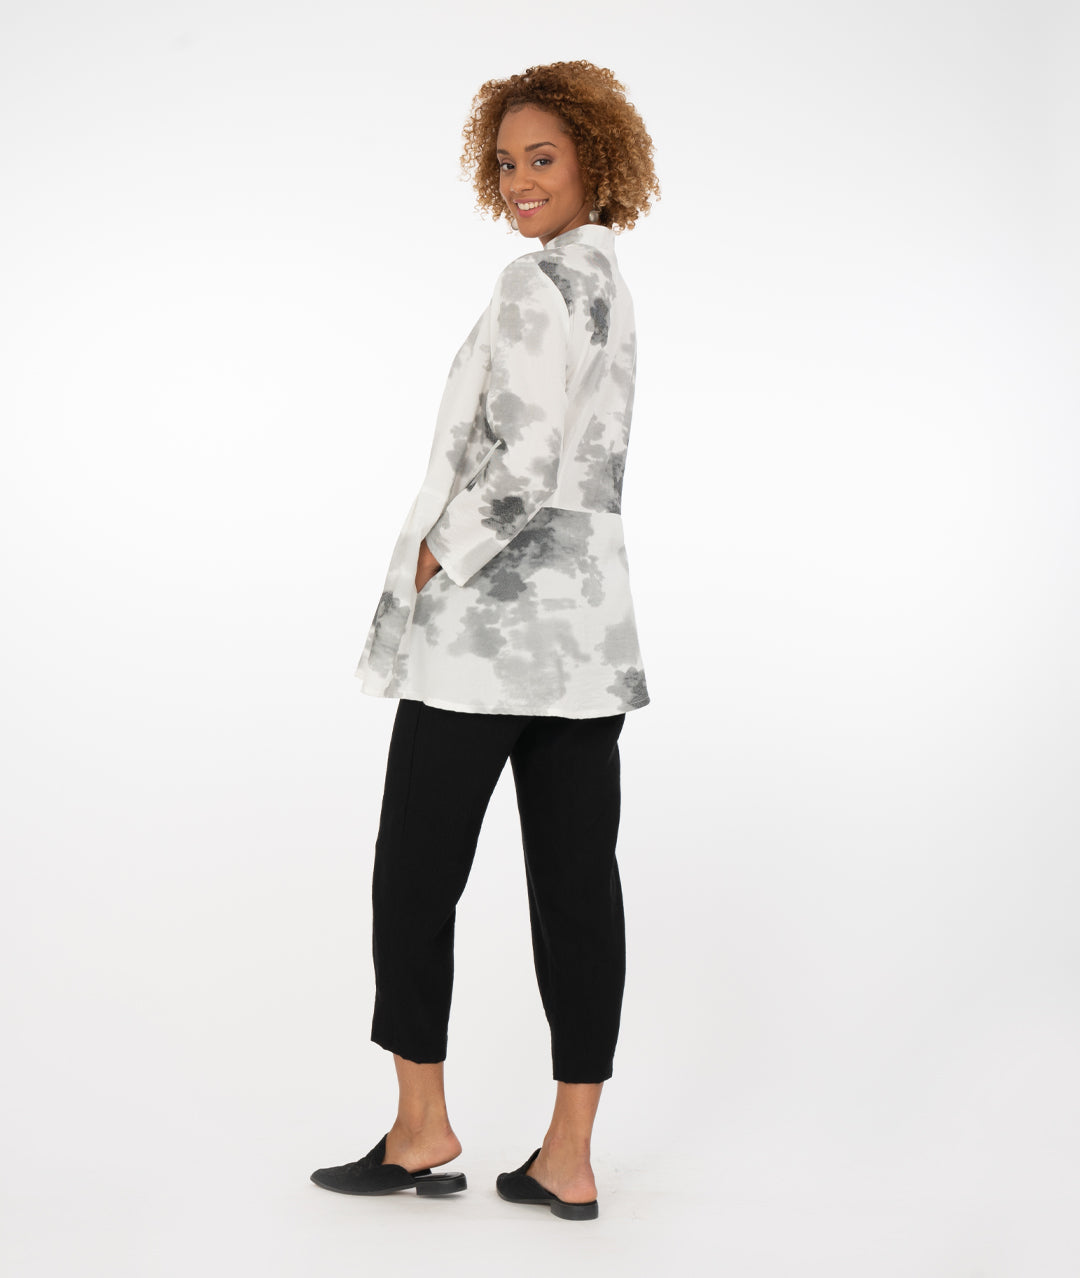 model in a black pant with a white and grey cloud print blouse with an asymmetrical hem and body